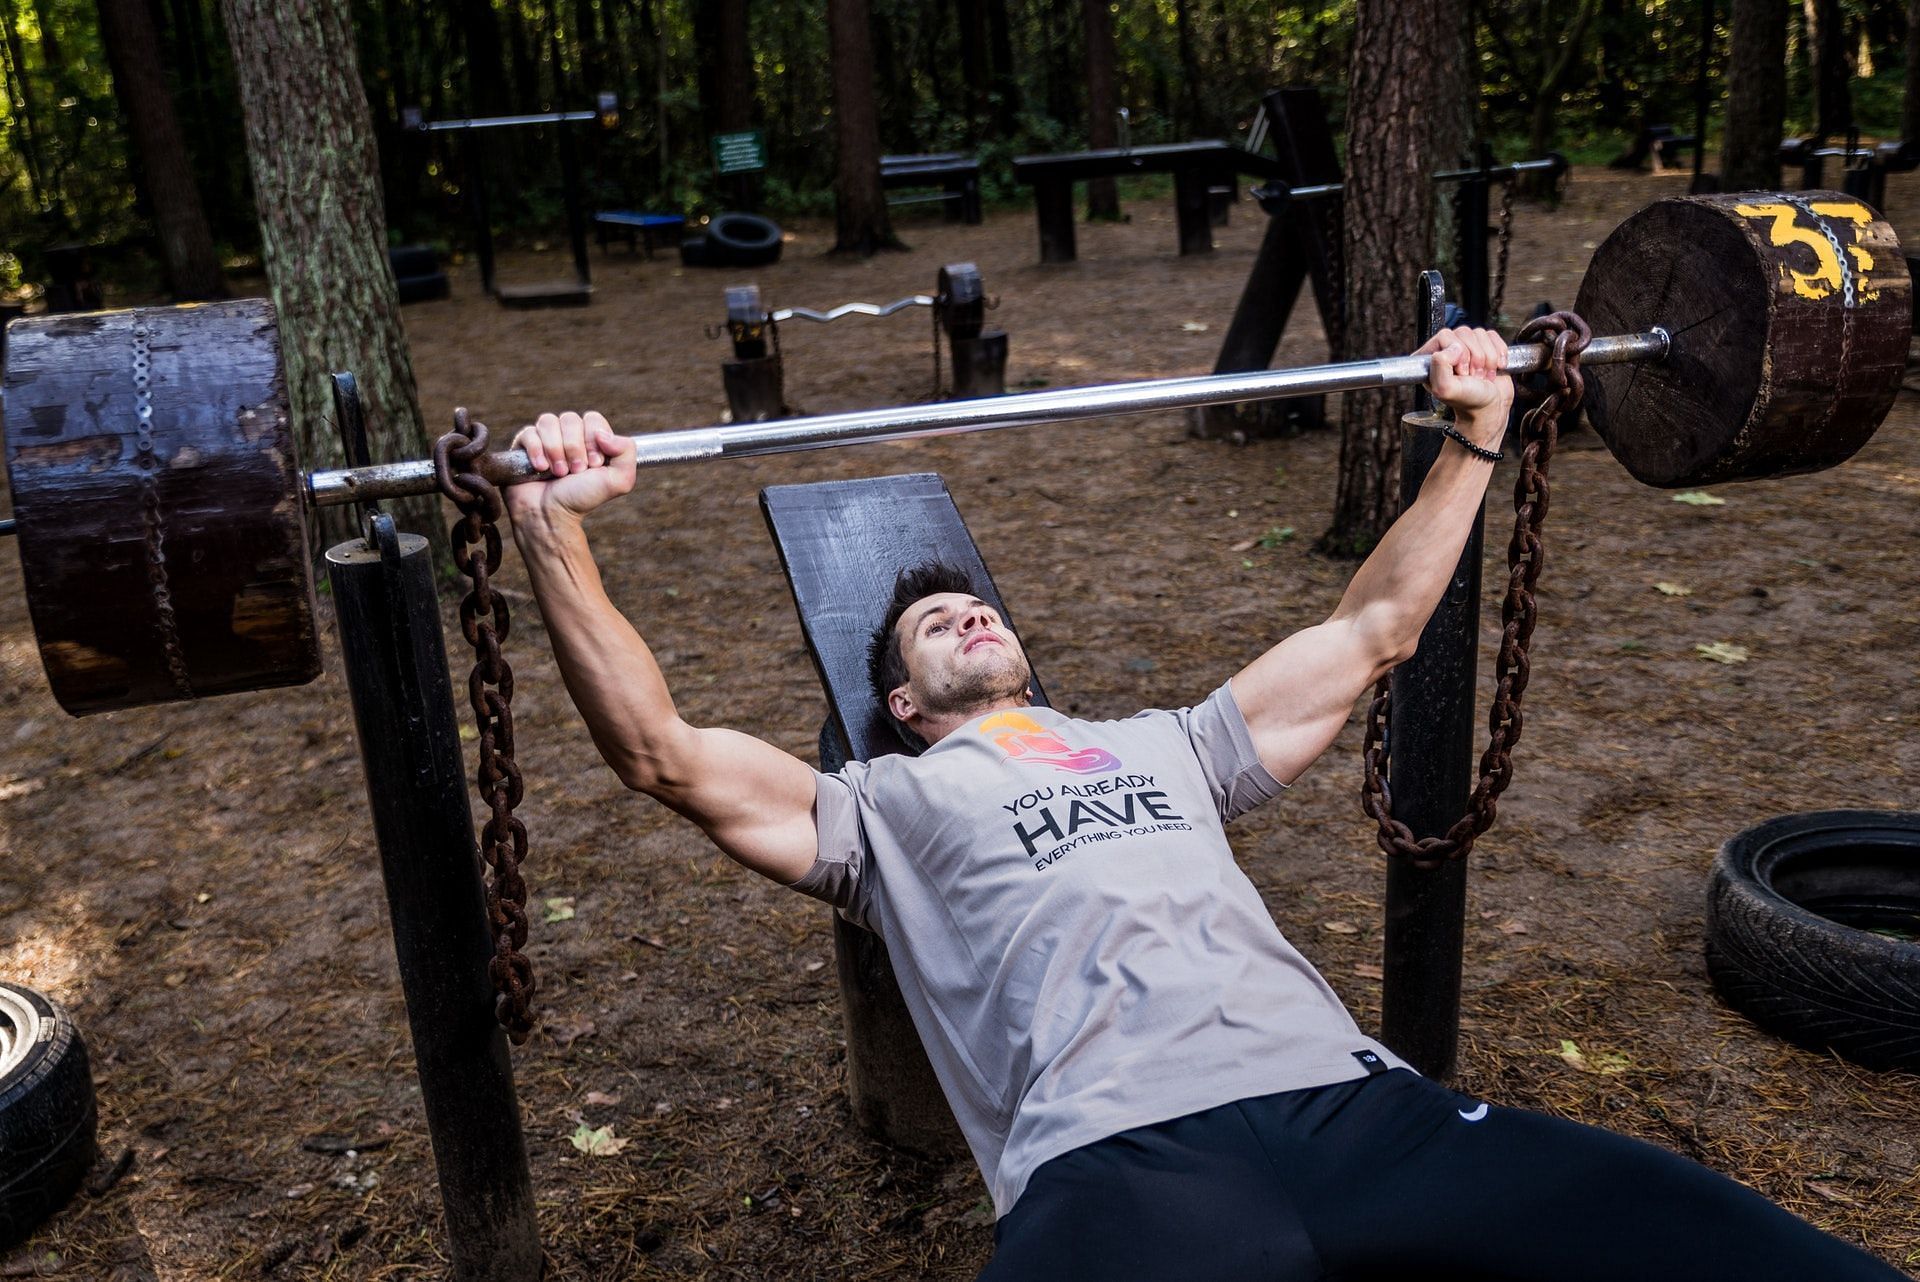 The best chest workouts for a well-shaped chest. (Image via Pexels/Photo by Frame Kings)